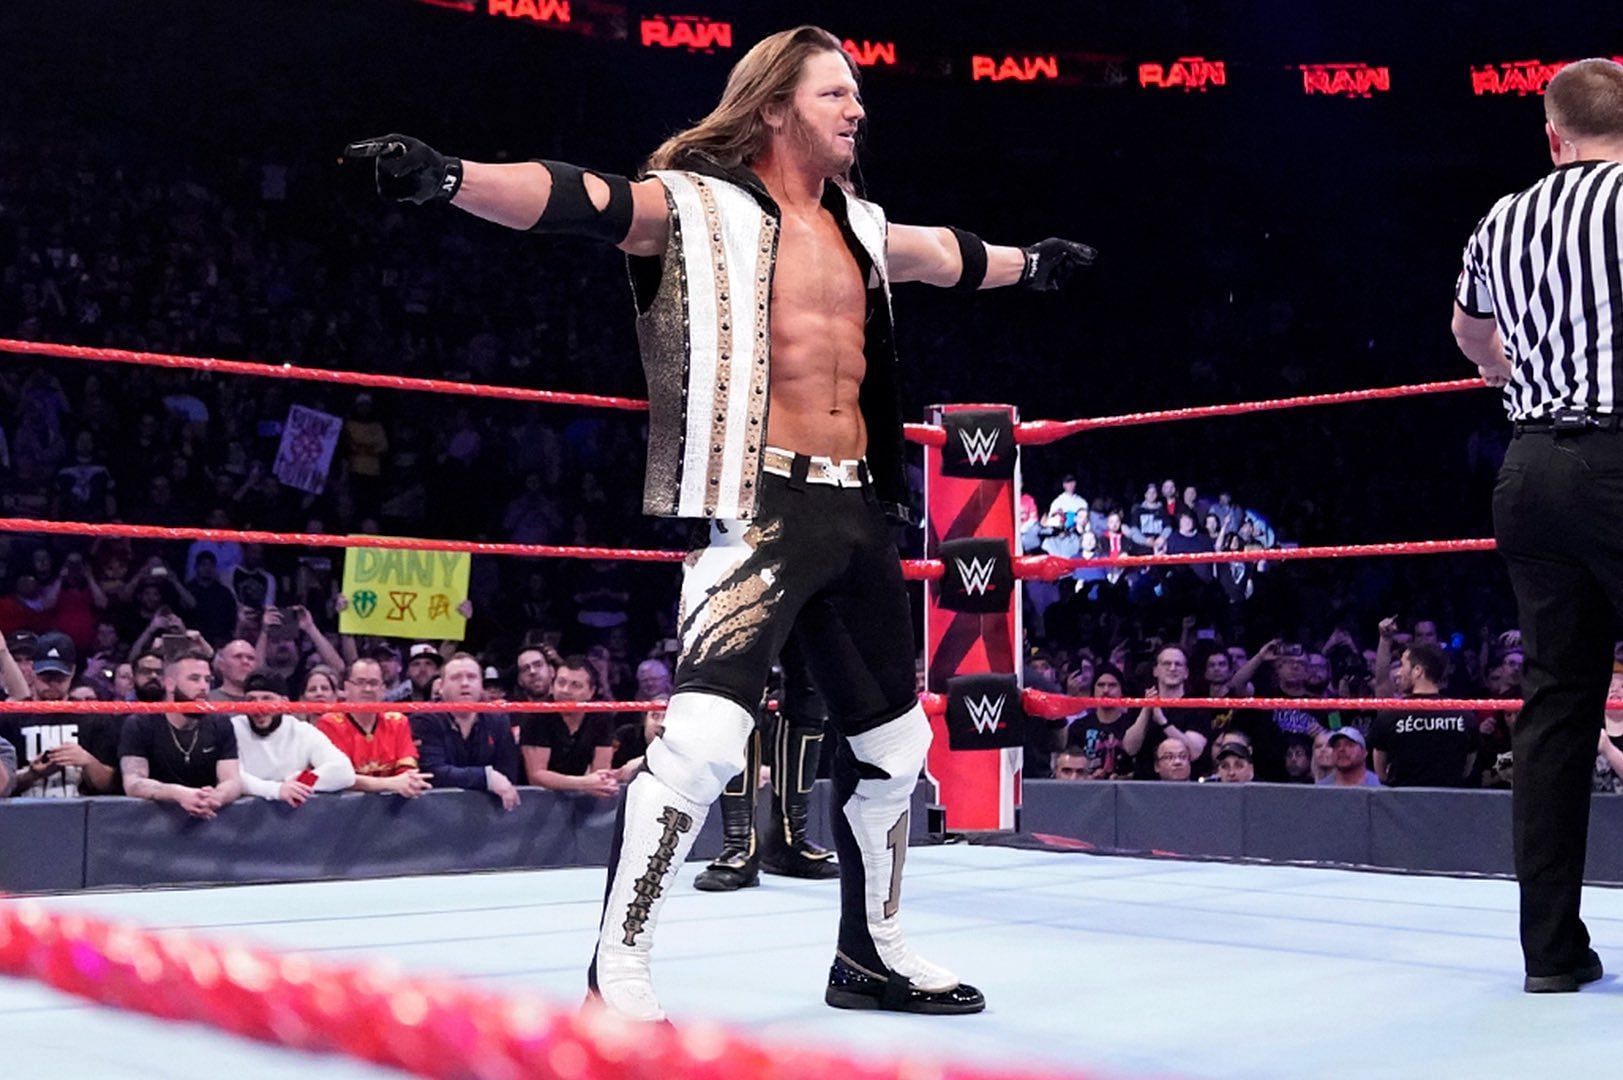 AJ Styles is looking forward to making a statement at Royal Rumble